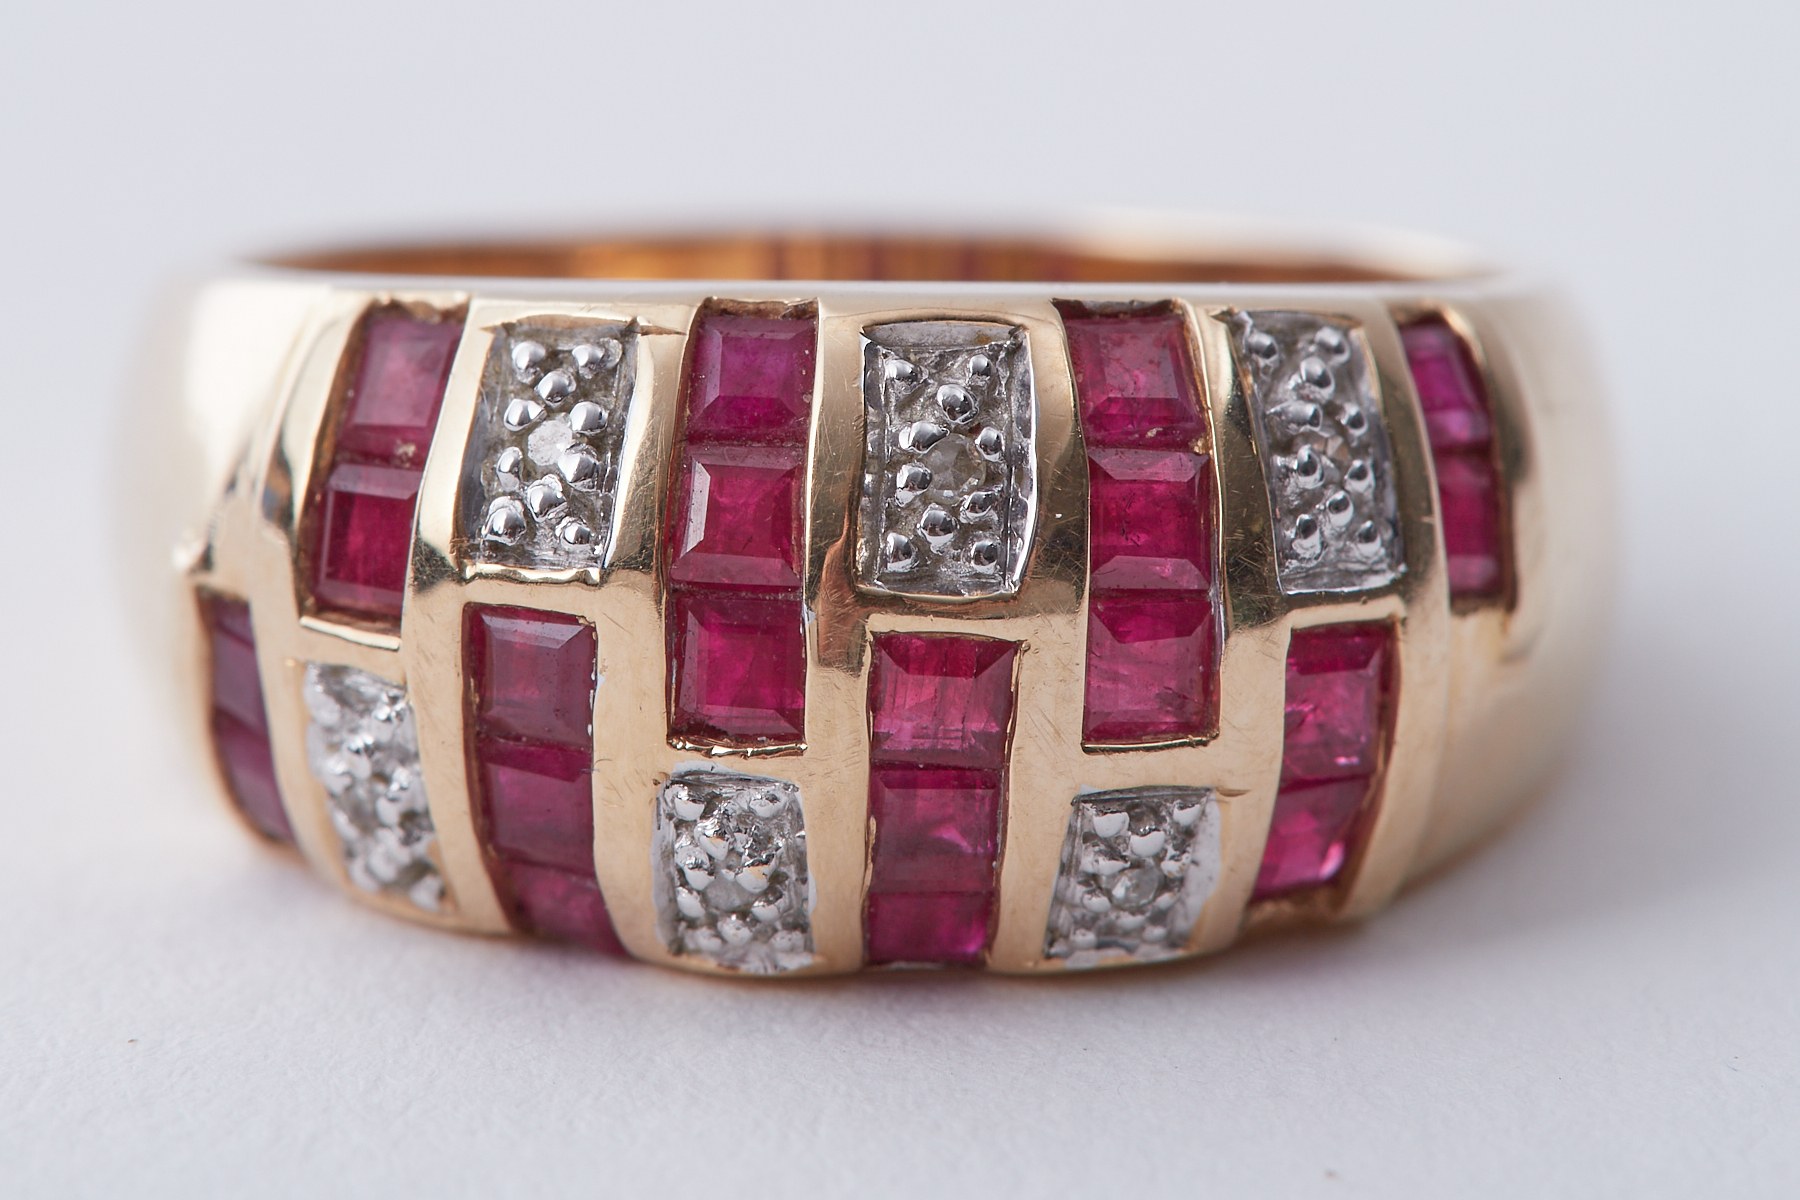 A 14k yellow gold ring set with square cut rubies and small round cut diamonds in an